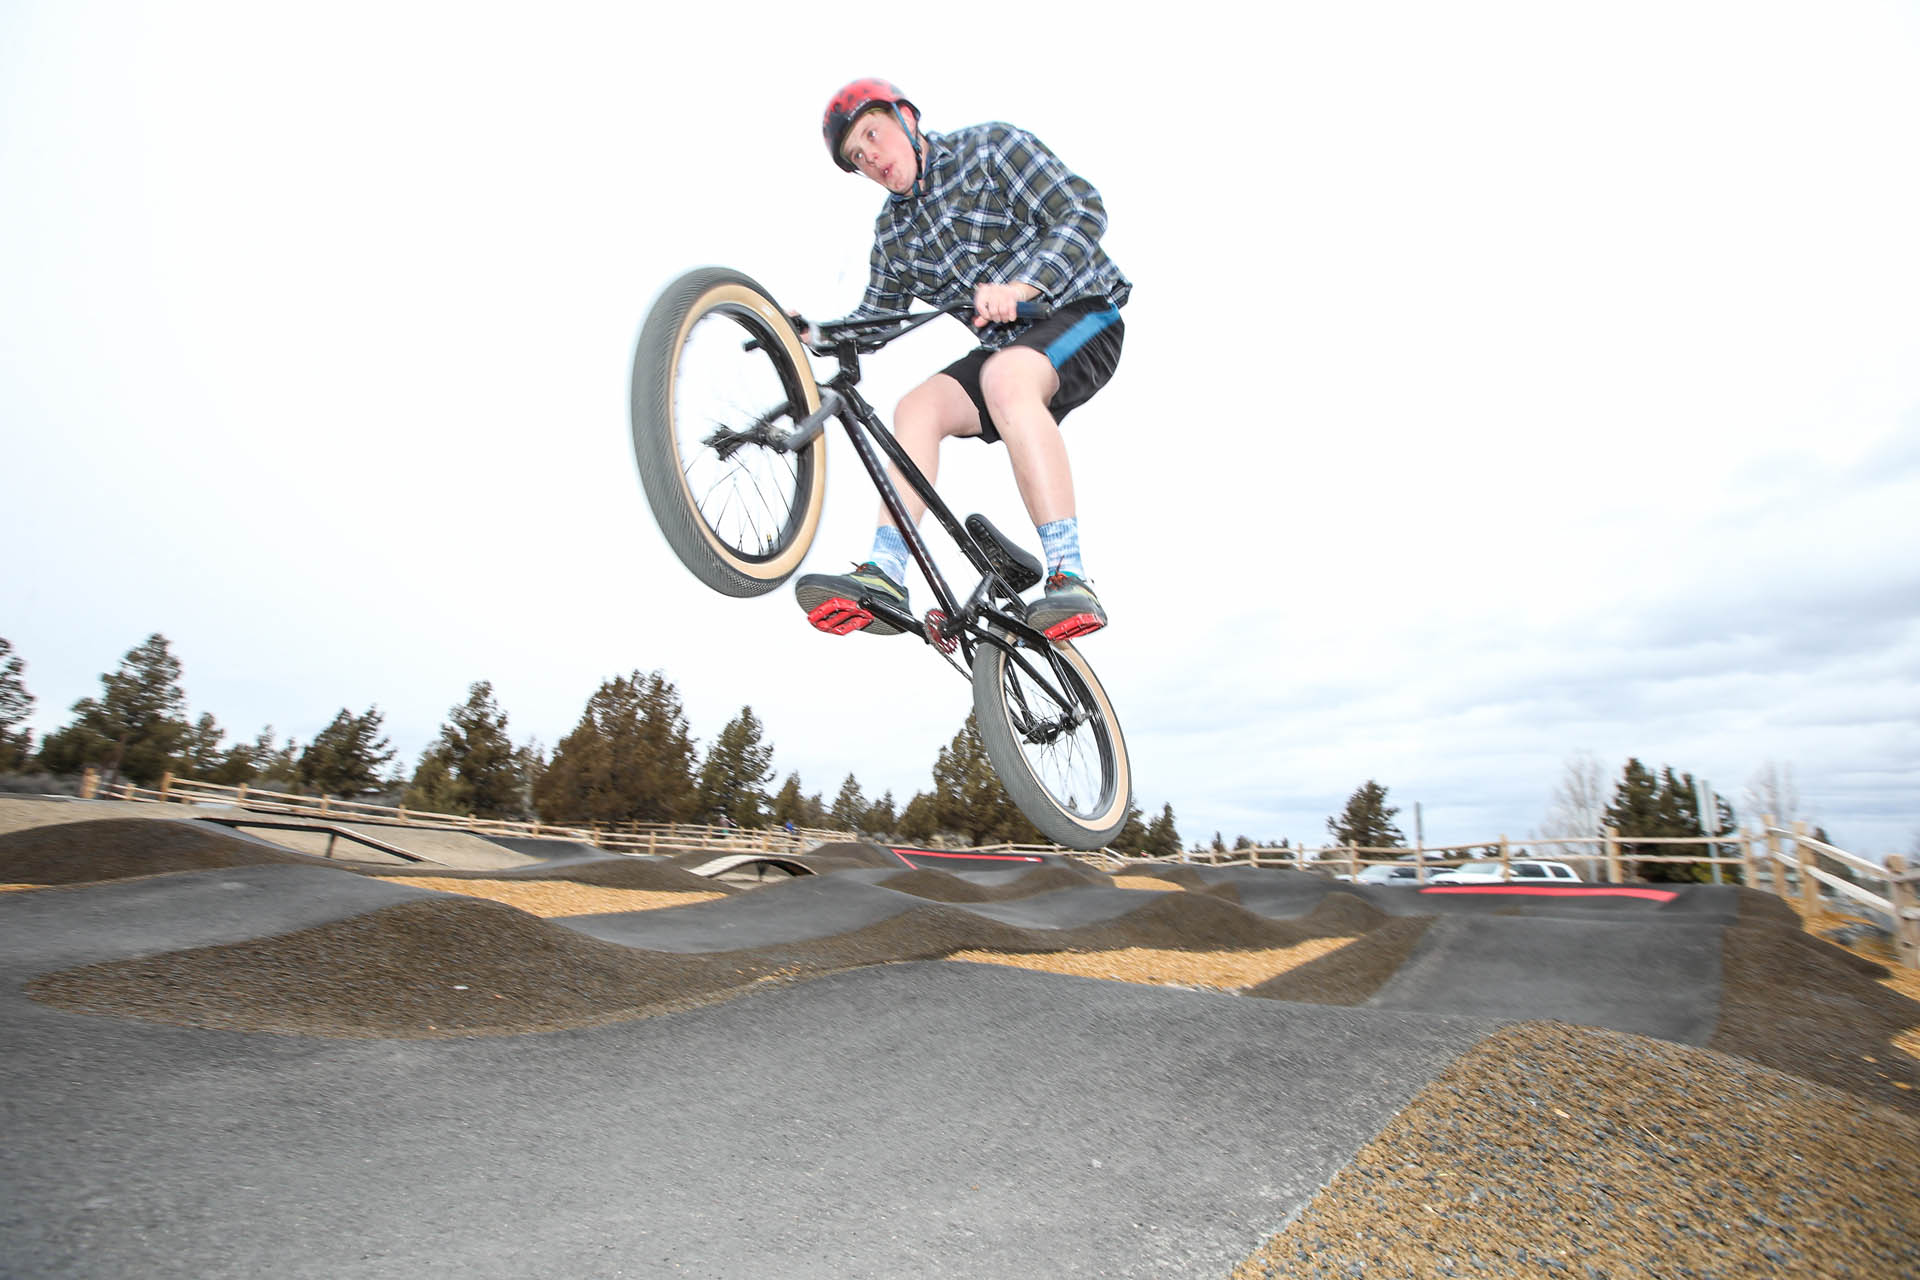 a cyclist on a BMX bike catches air on the pump track